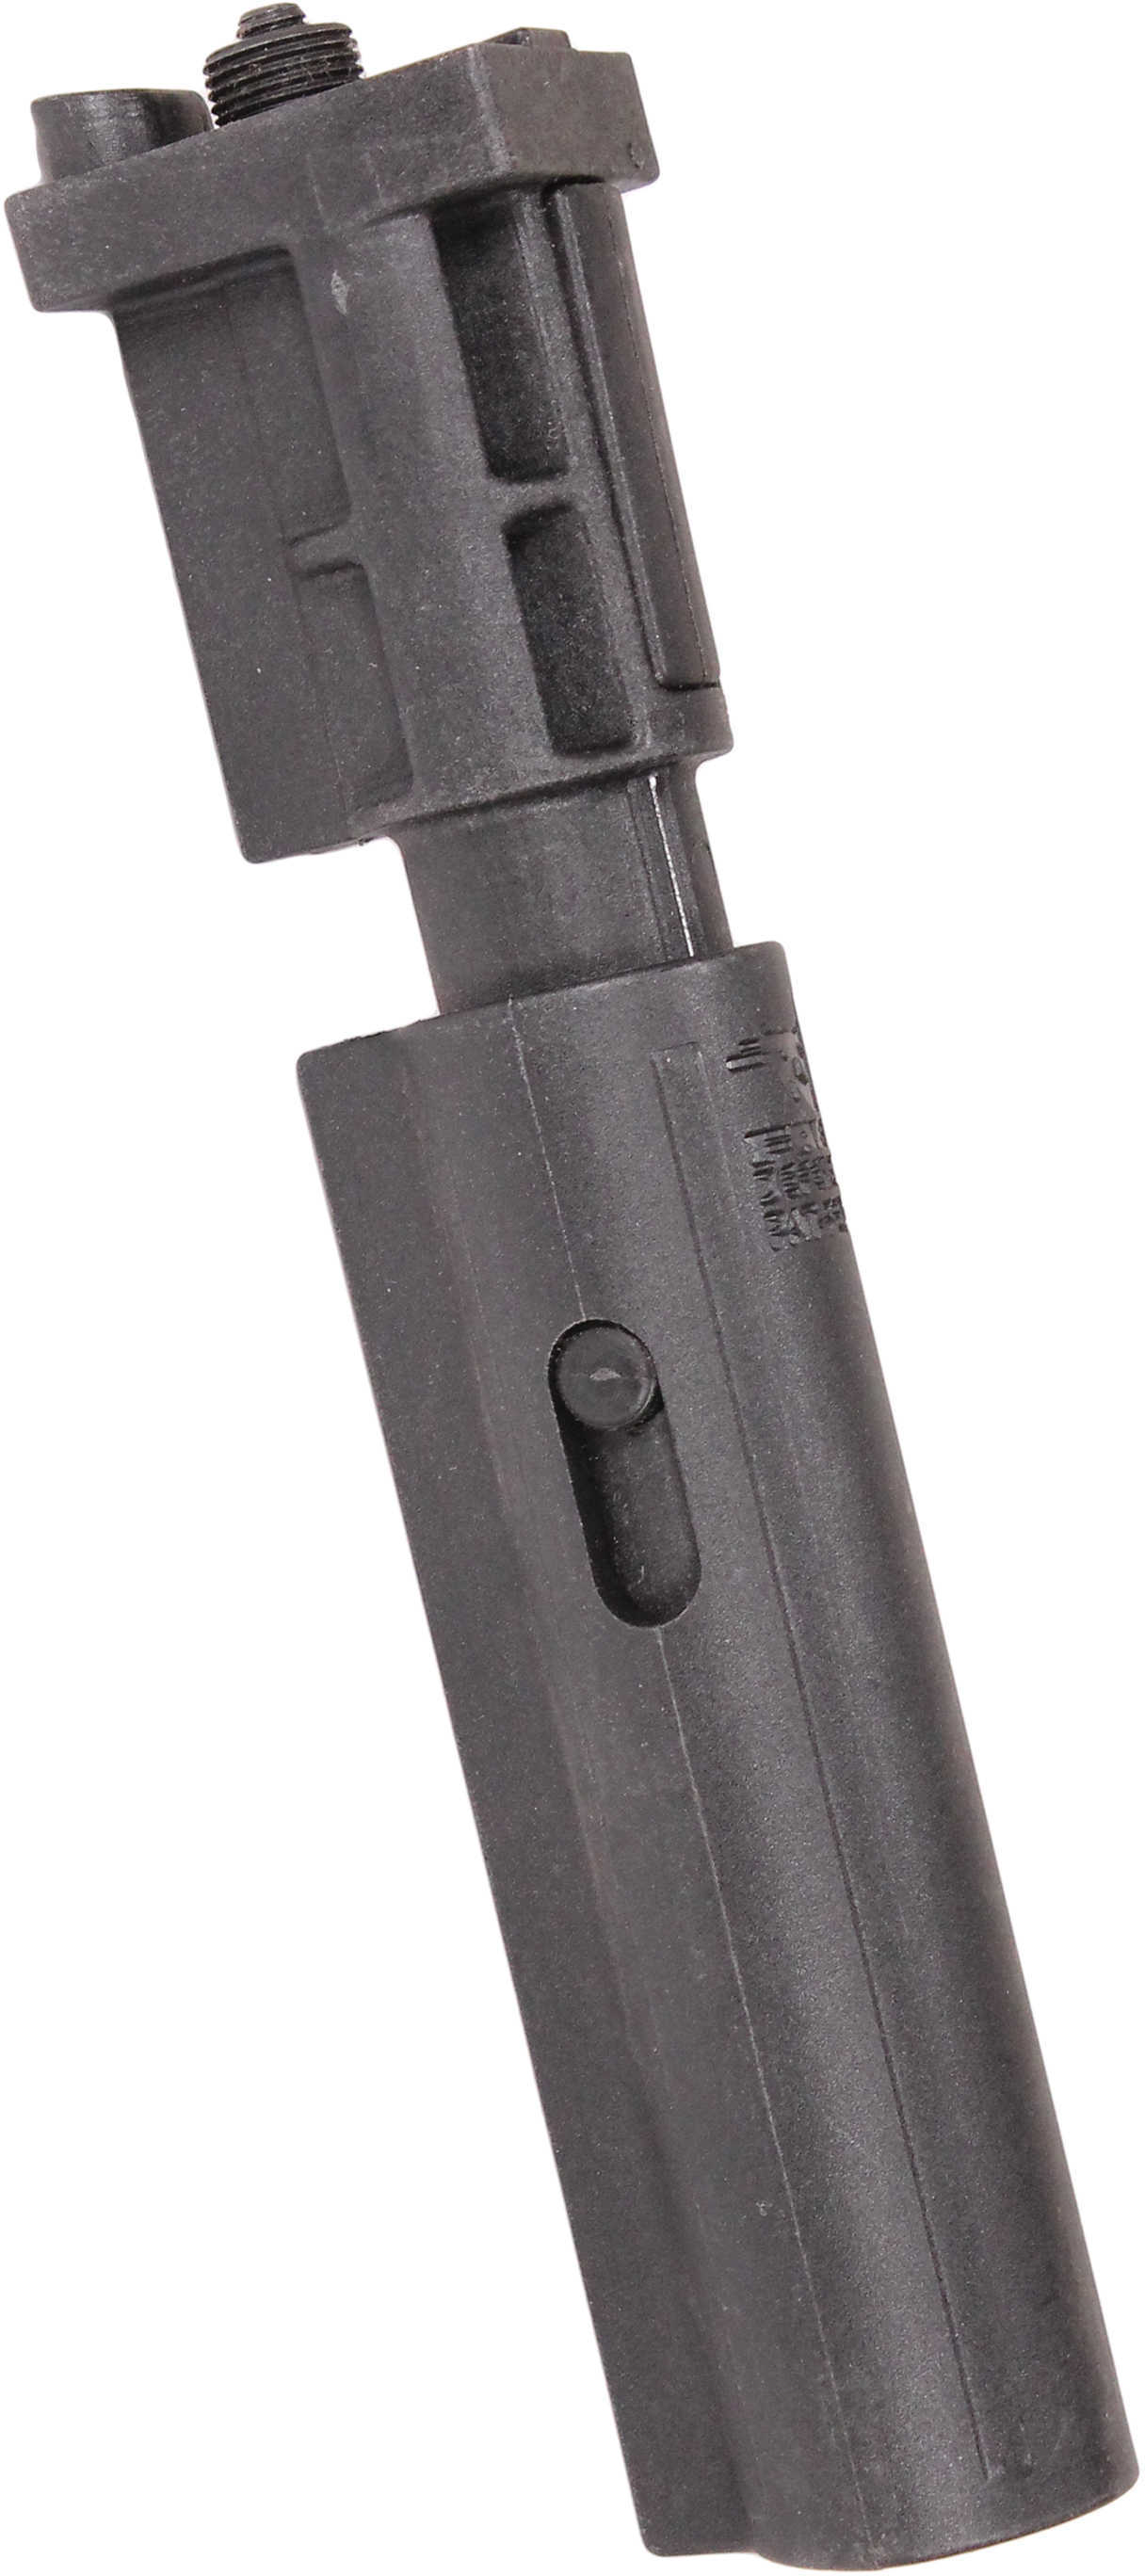 Collapsible Buttstock Tube with Shock Absorber, VZ.58, Black